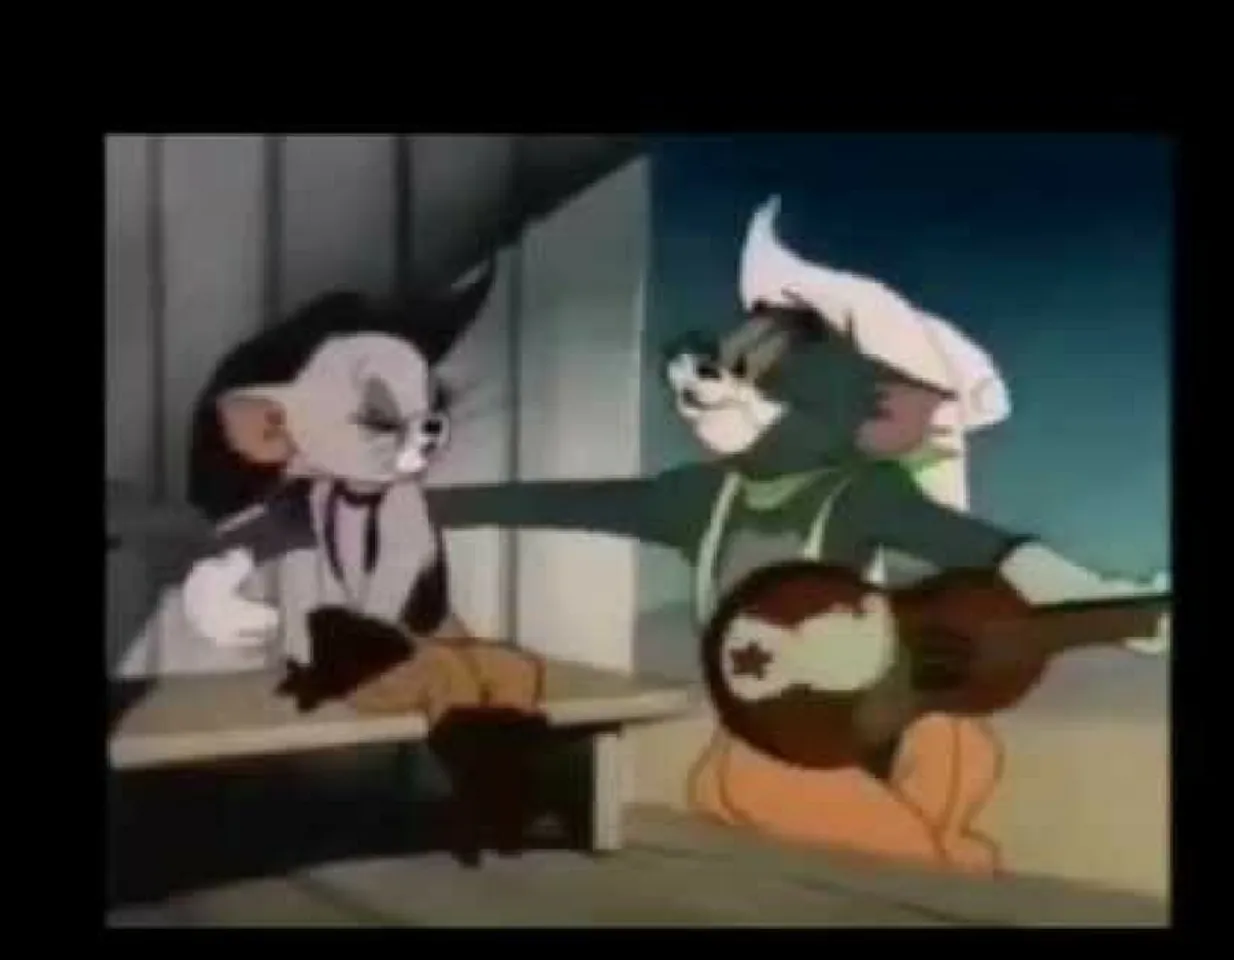 TOM FROM TOM & JERRY SINGING THIS KISHORE KUMAR CLASSIC HAS THE INTERNET GOING CRAZY